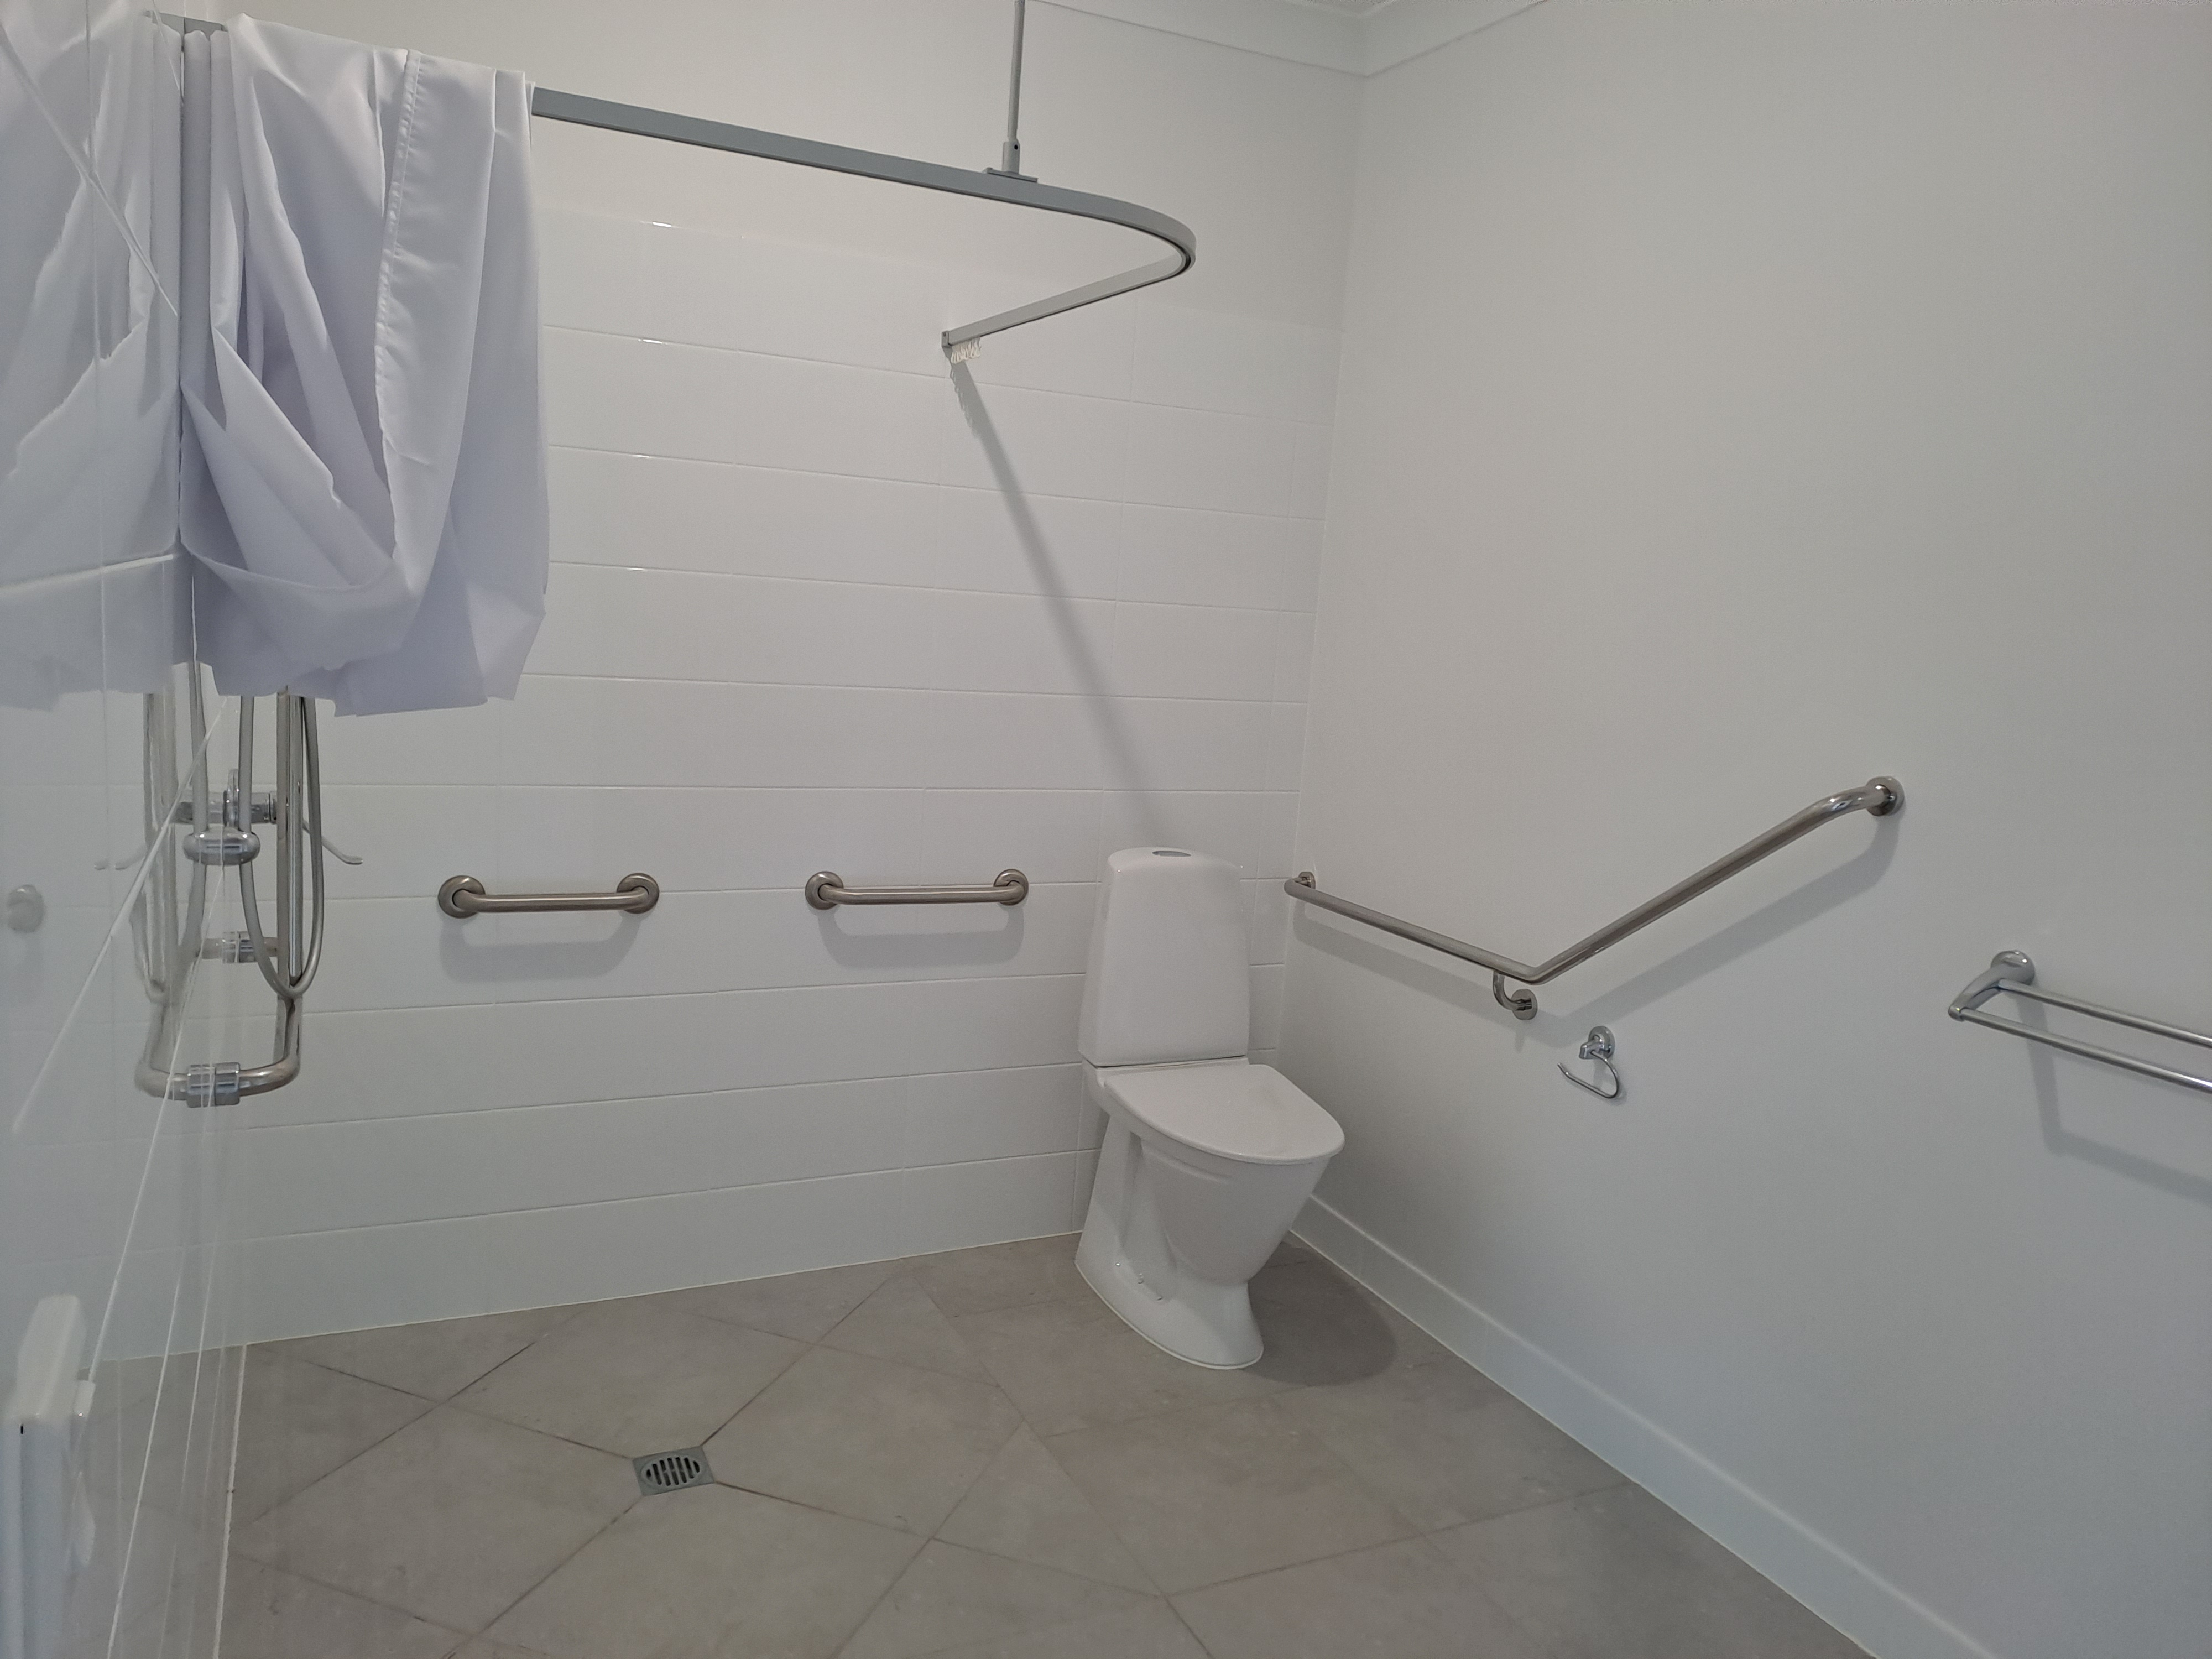 A white bathroom with handrails